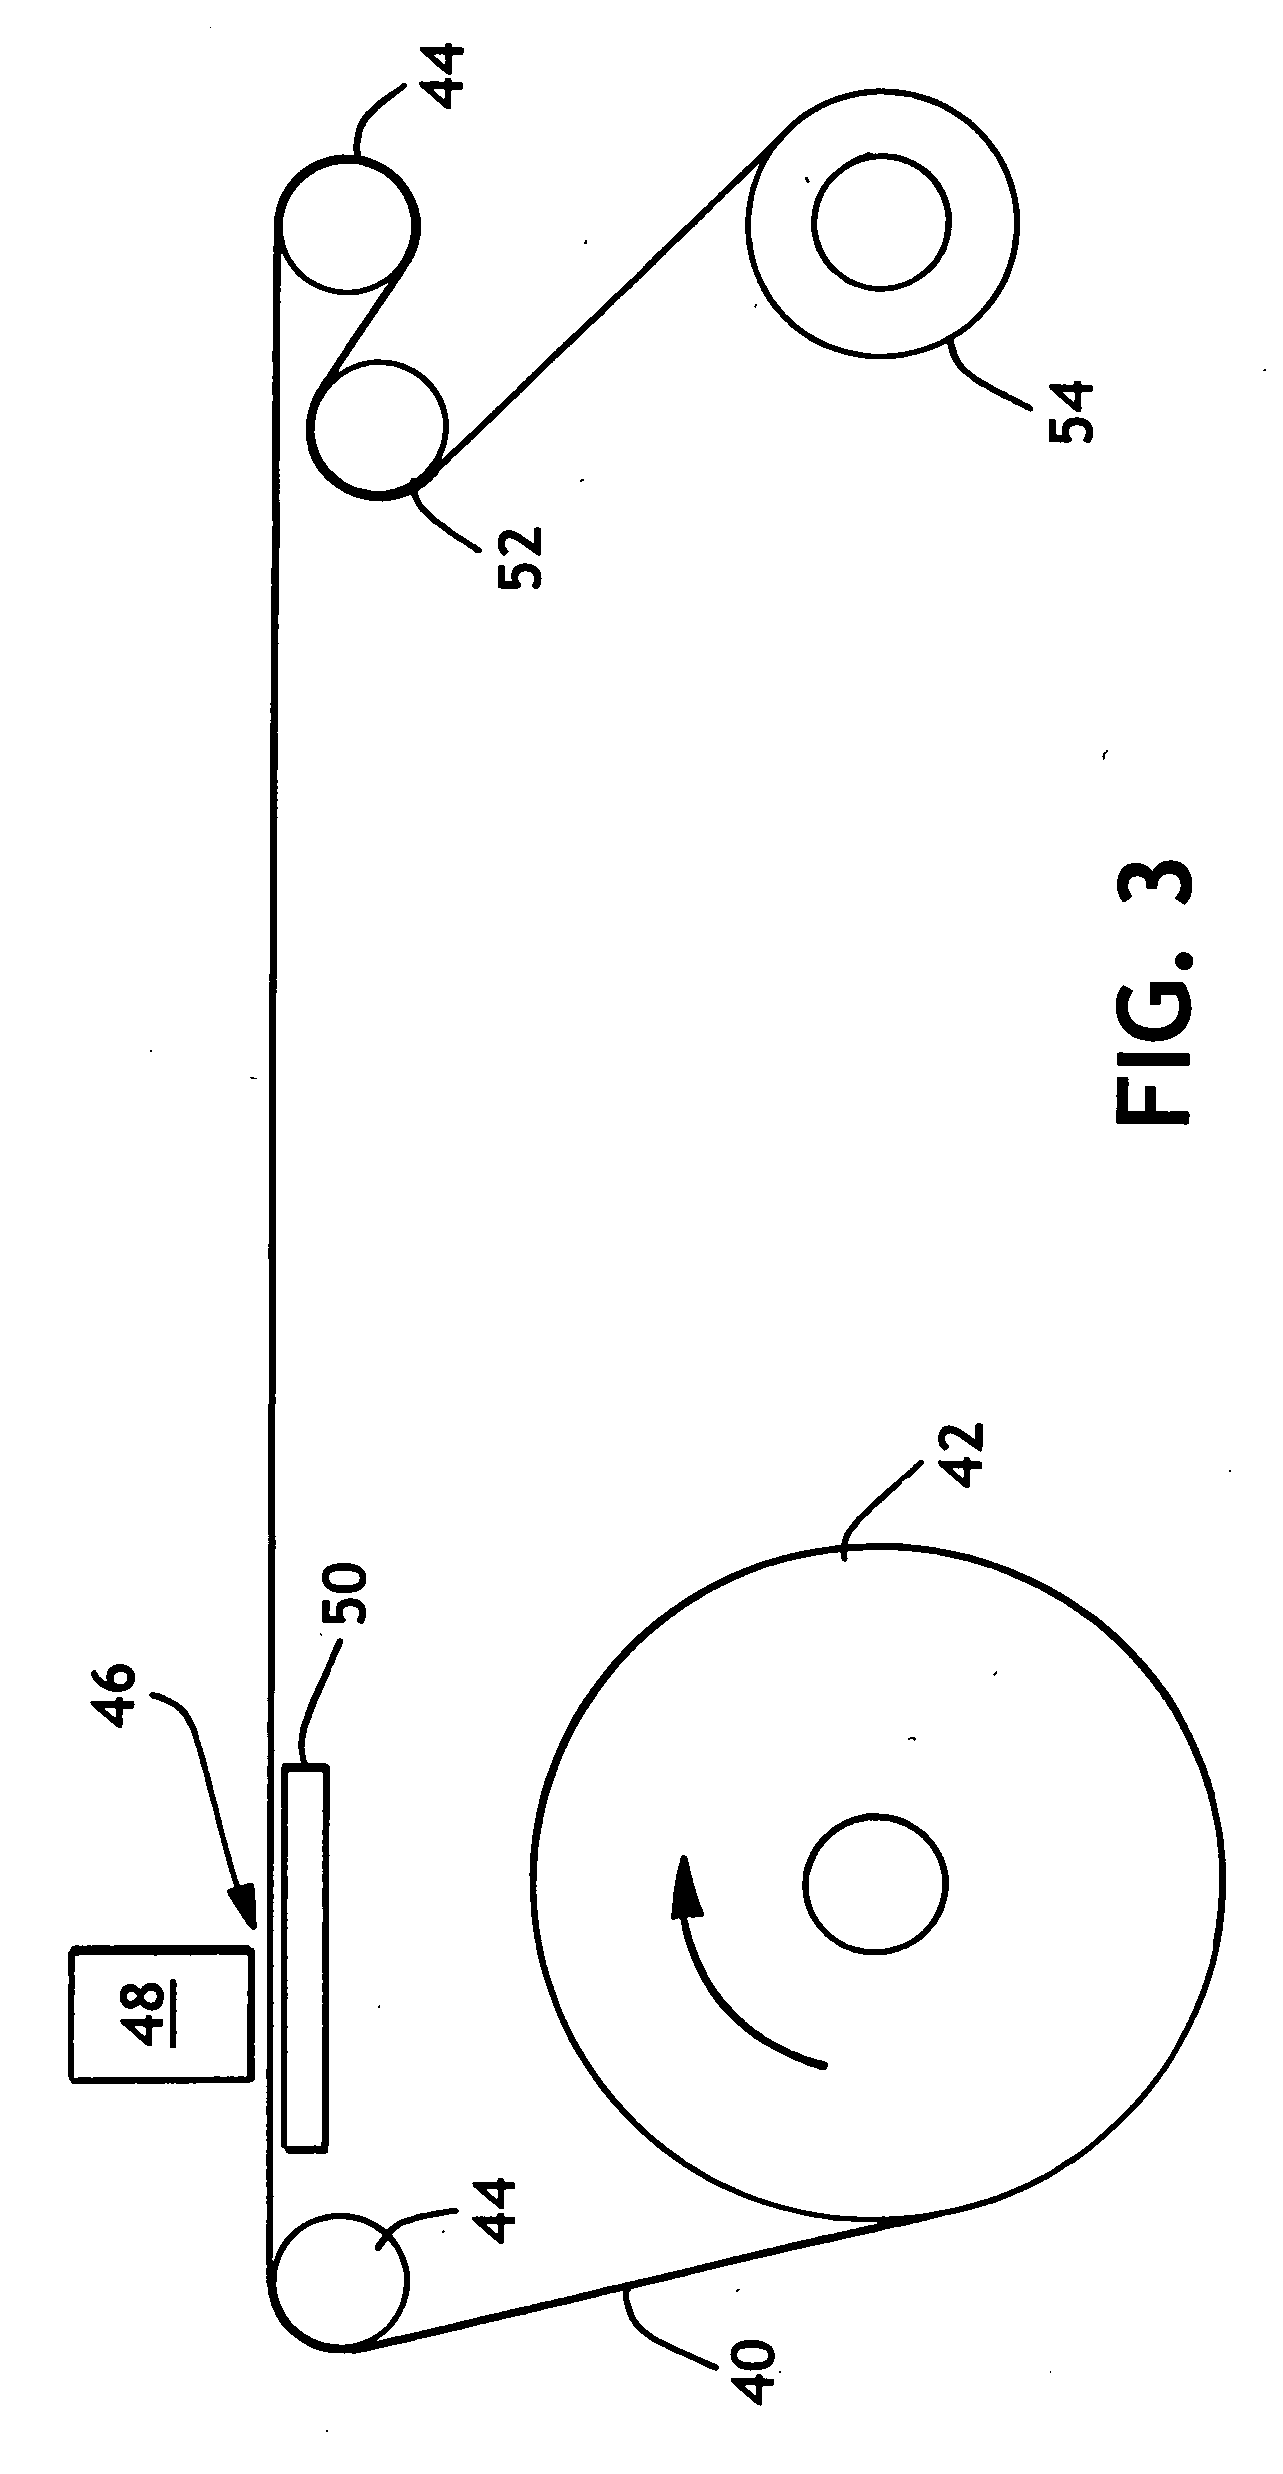 Method of treating substrates with ionic fluoropolymers